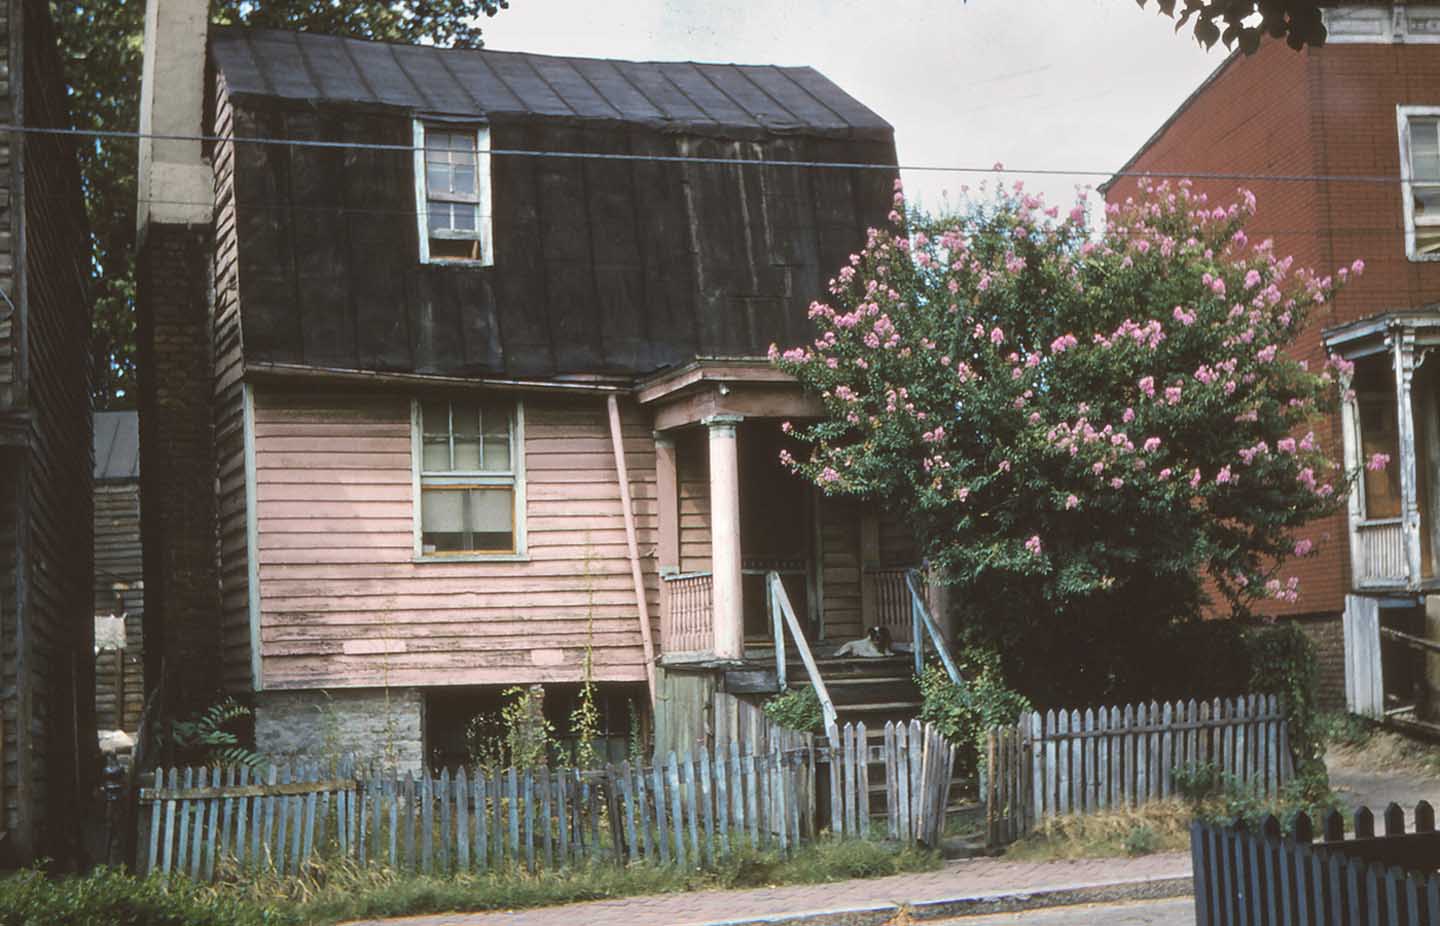 Abraham Skipwith's gambrel-roof cottage in Jackson Ward in the late 1950s